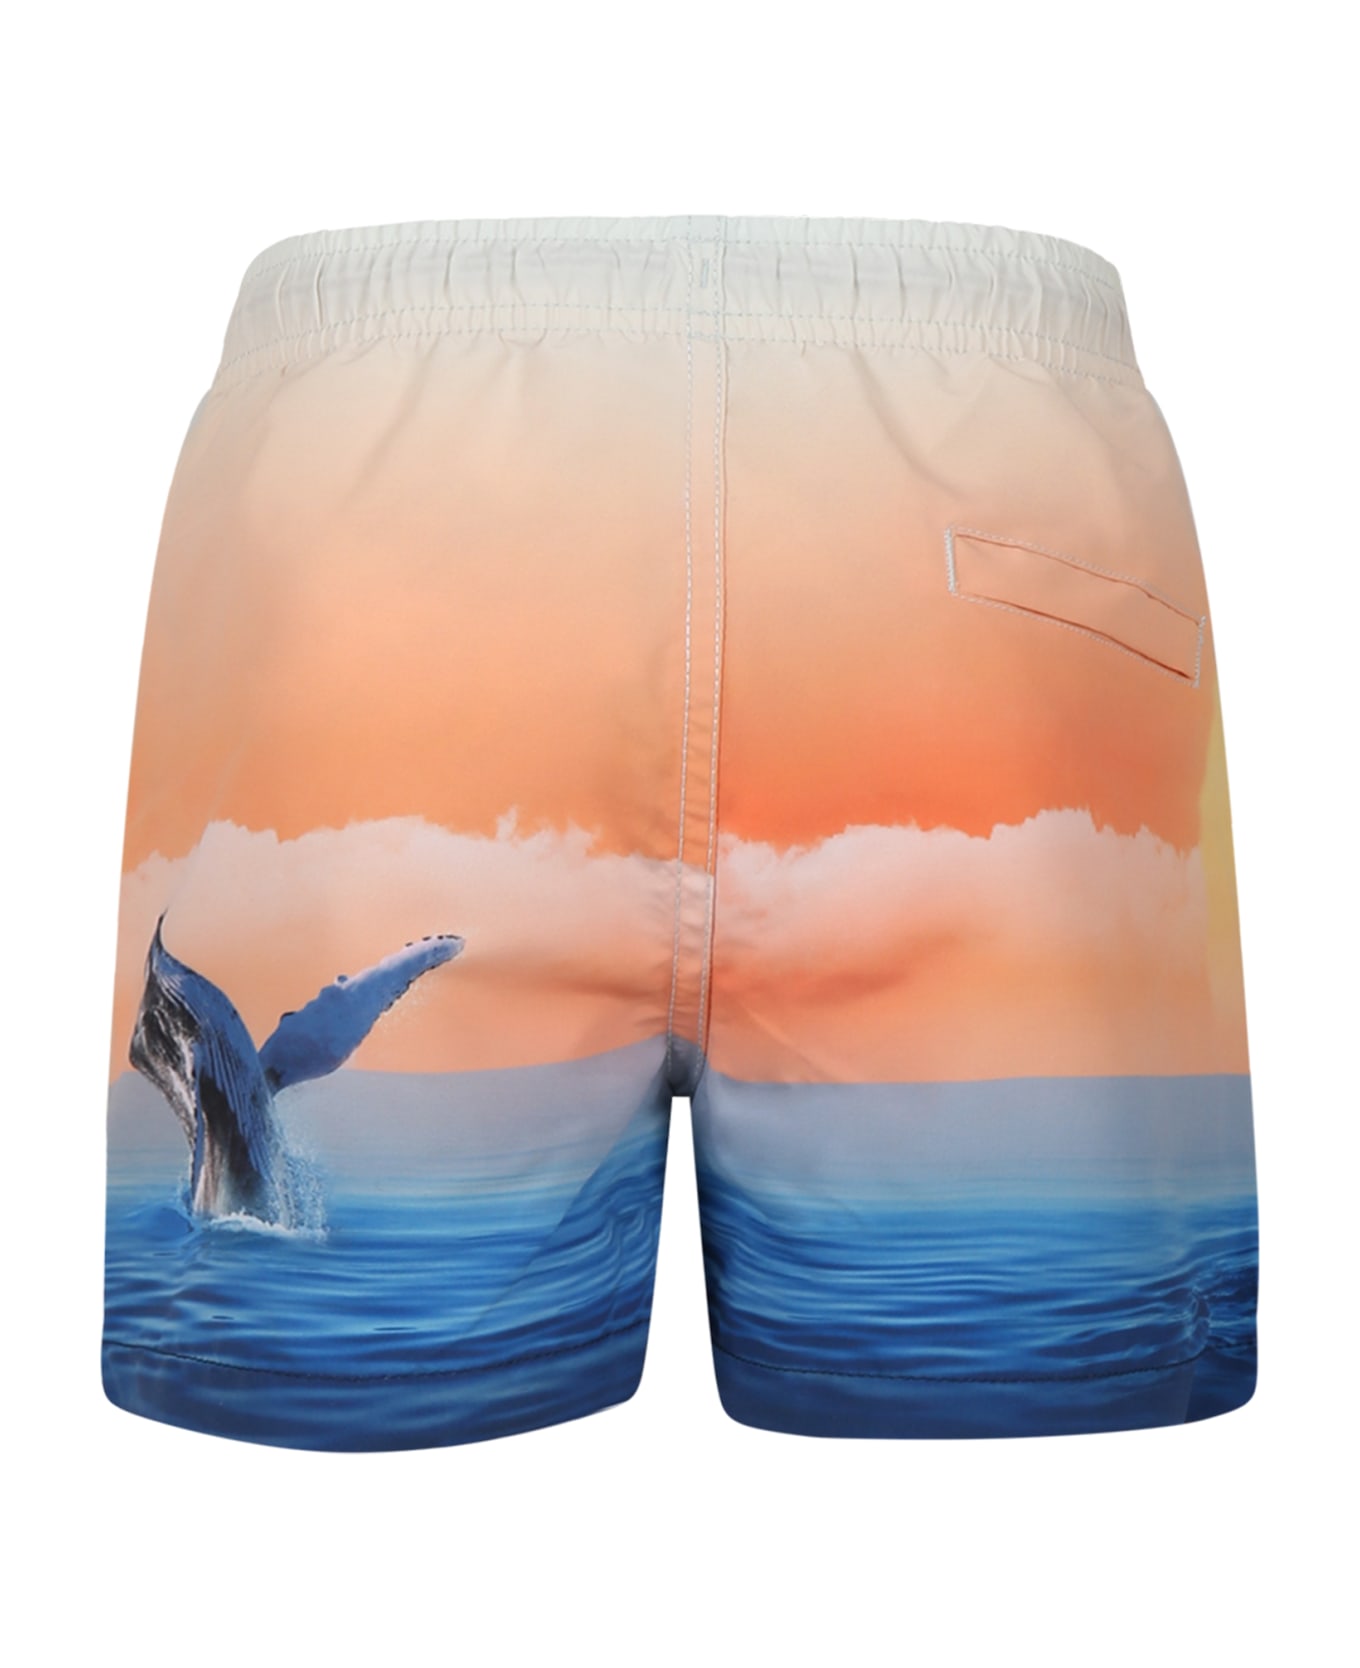 Molo Orange Swimsuit For Boy With Dolphins - Multicolor 水着